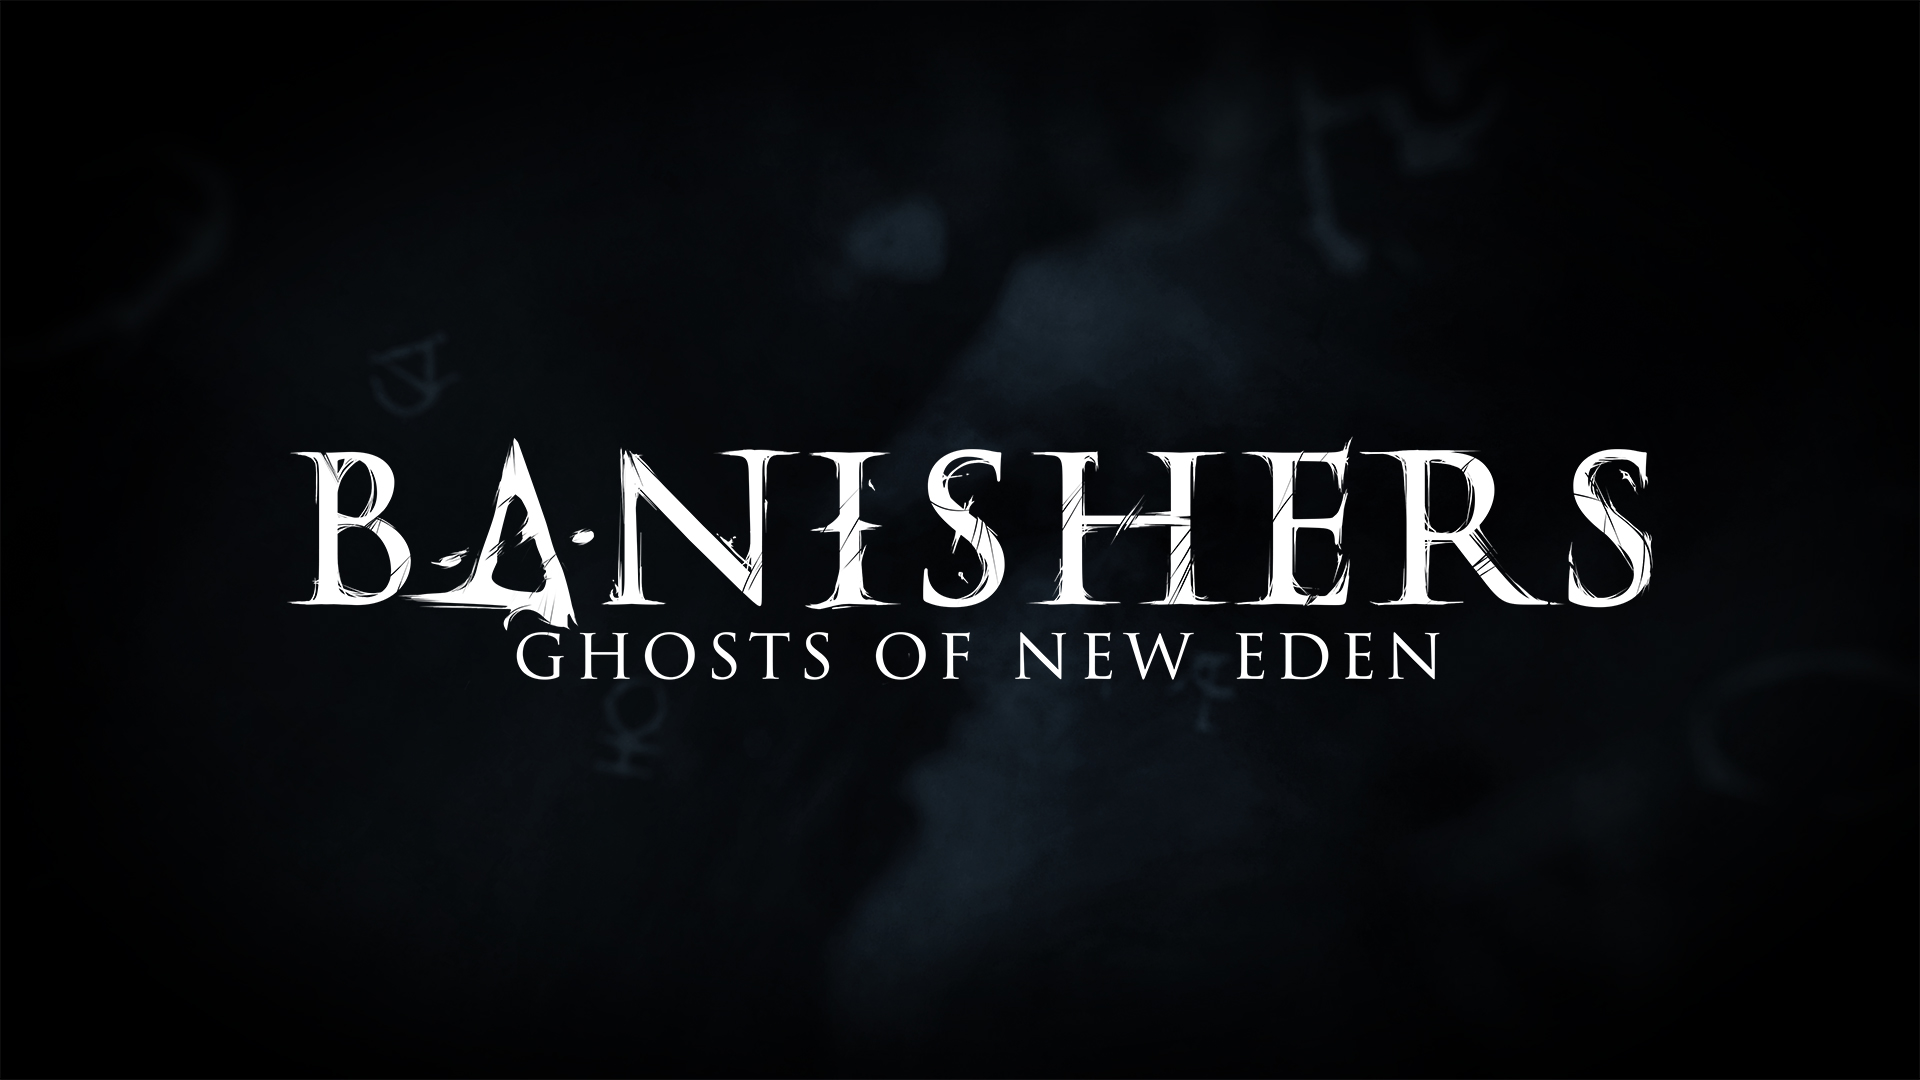 World premiere reveal of Banishers: Ghosts of New Eden